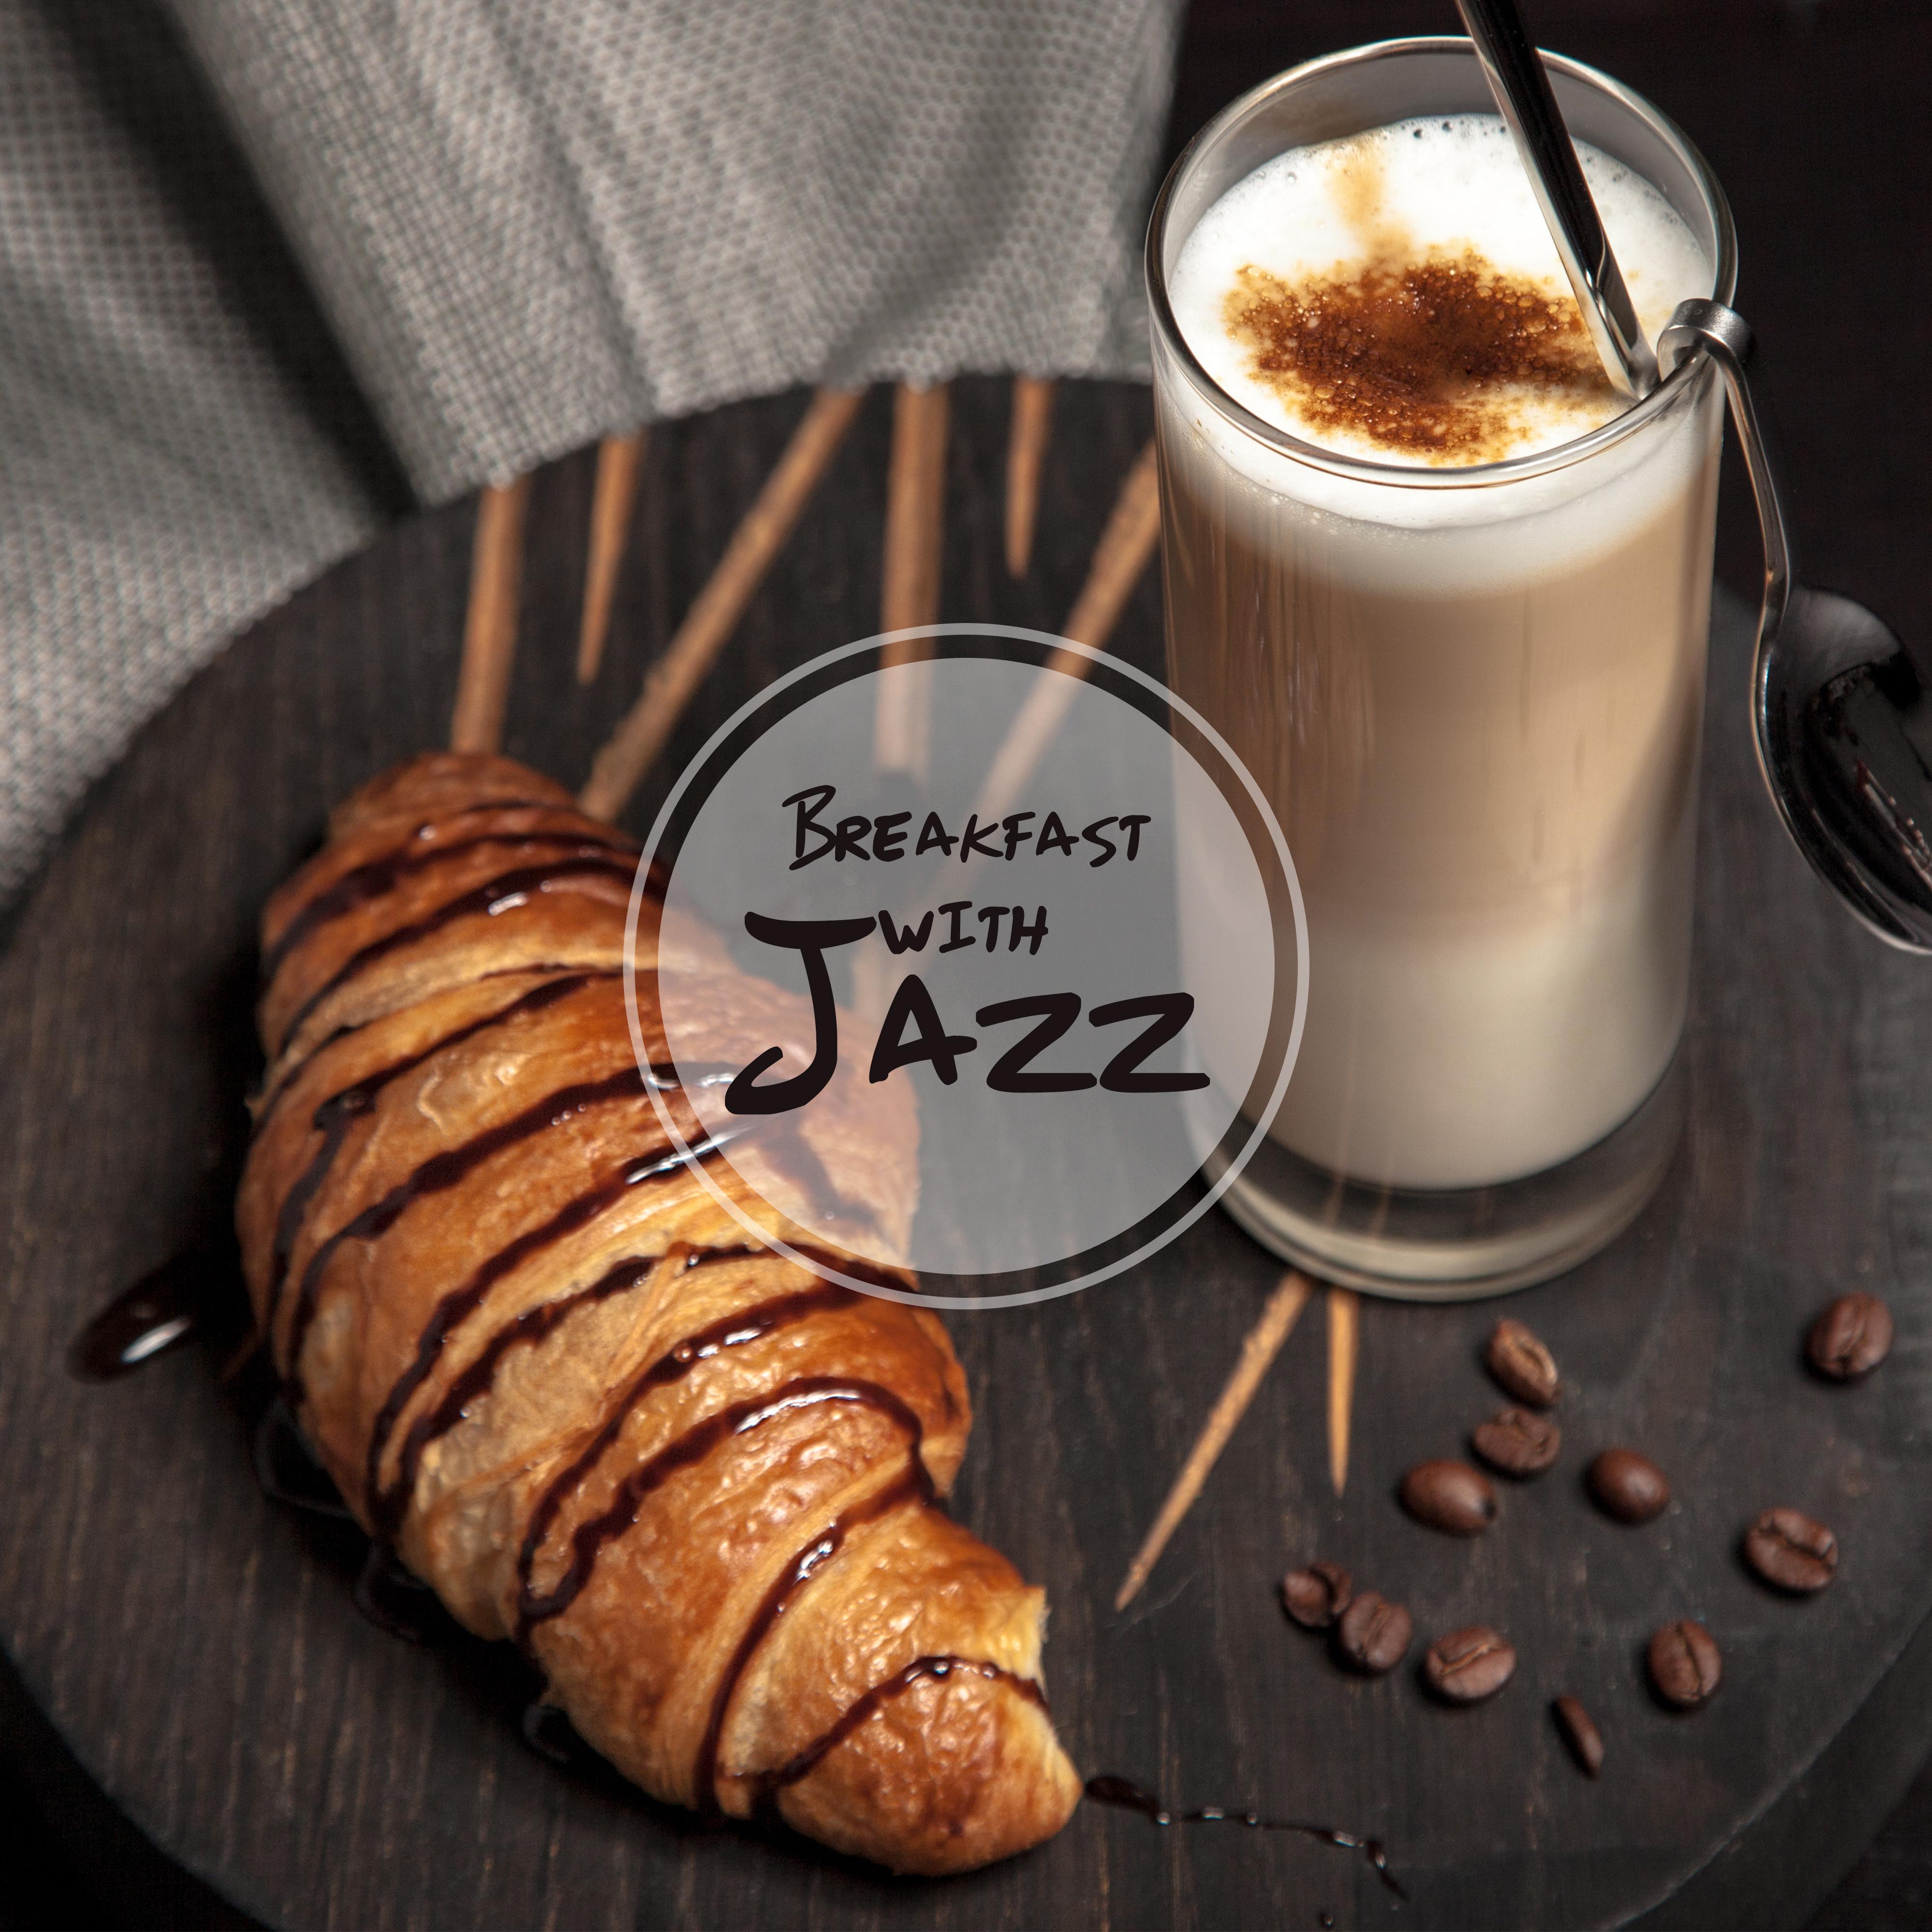 Breakfast with Jazz: Morning Dose of Subtle Jazz for a Good Start of the Day!